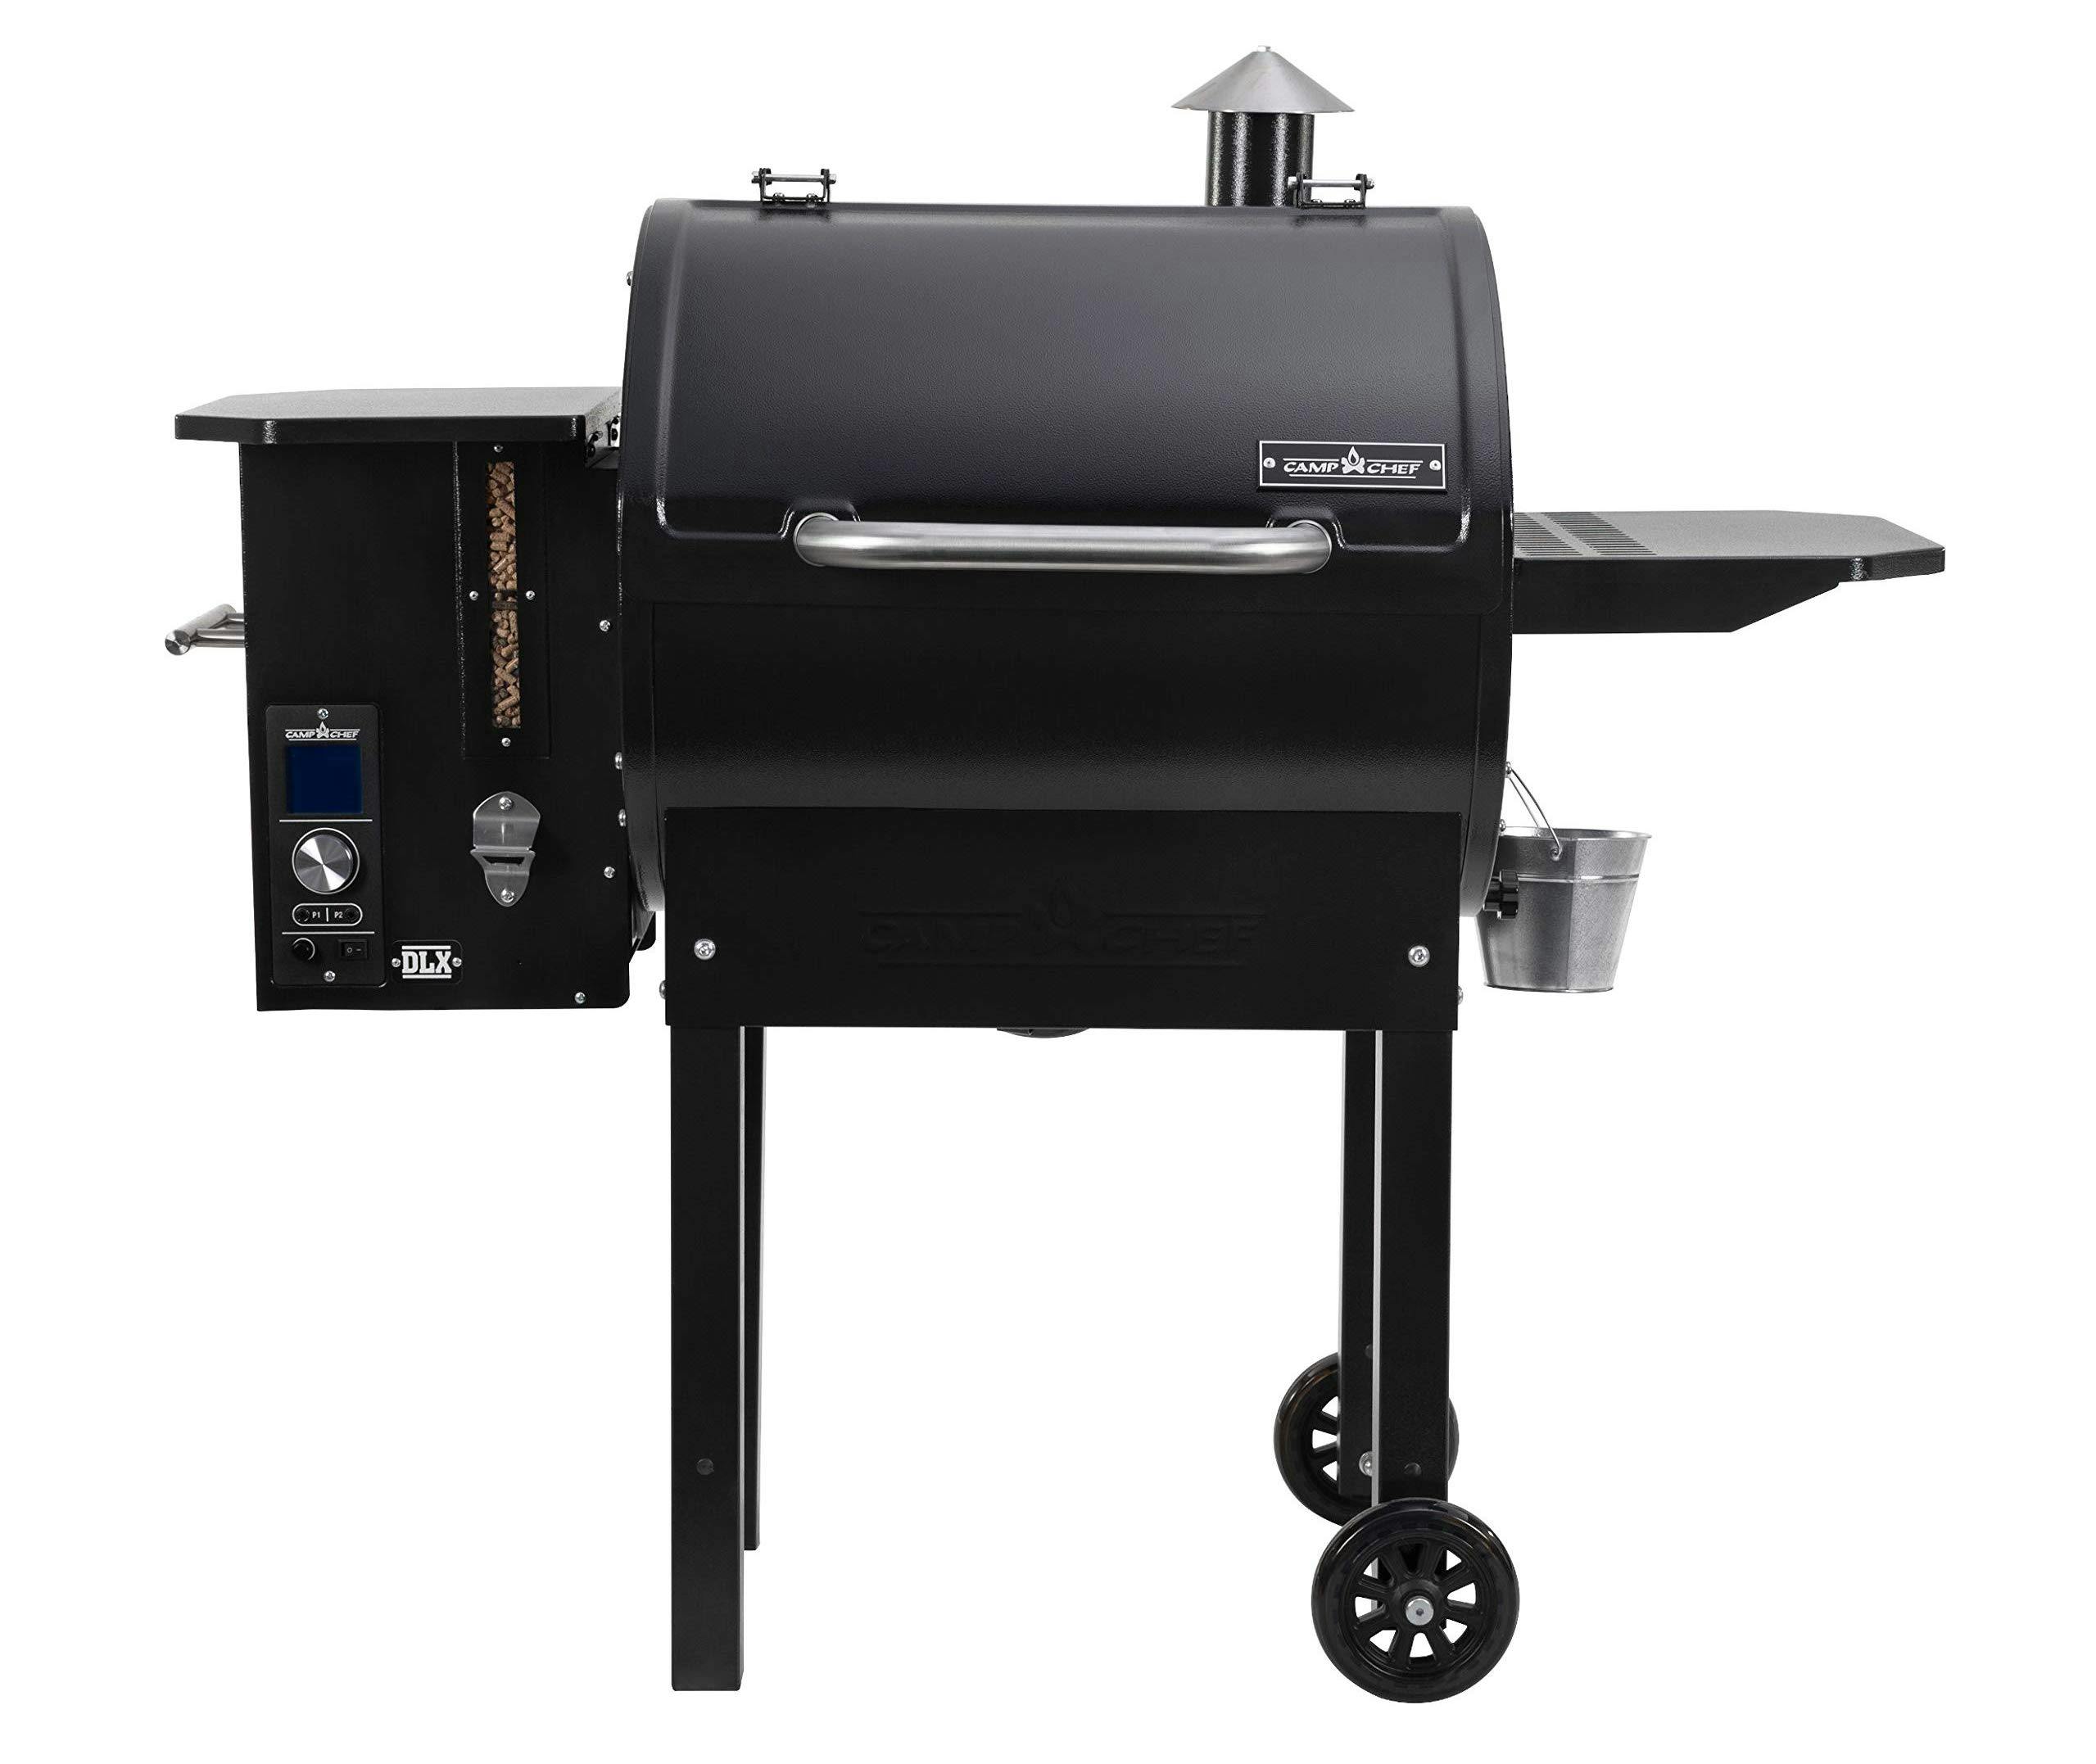 Product image of the Camp Chef DLX.